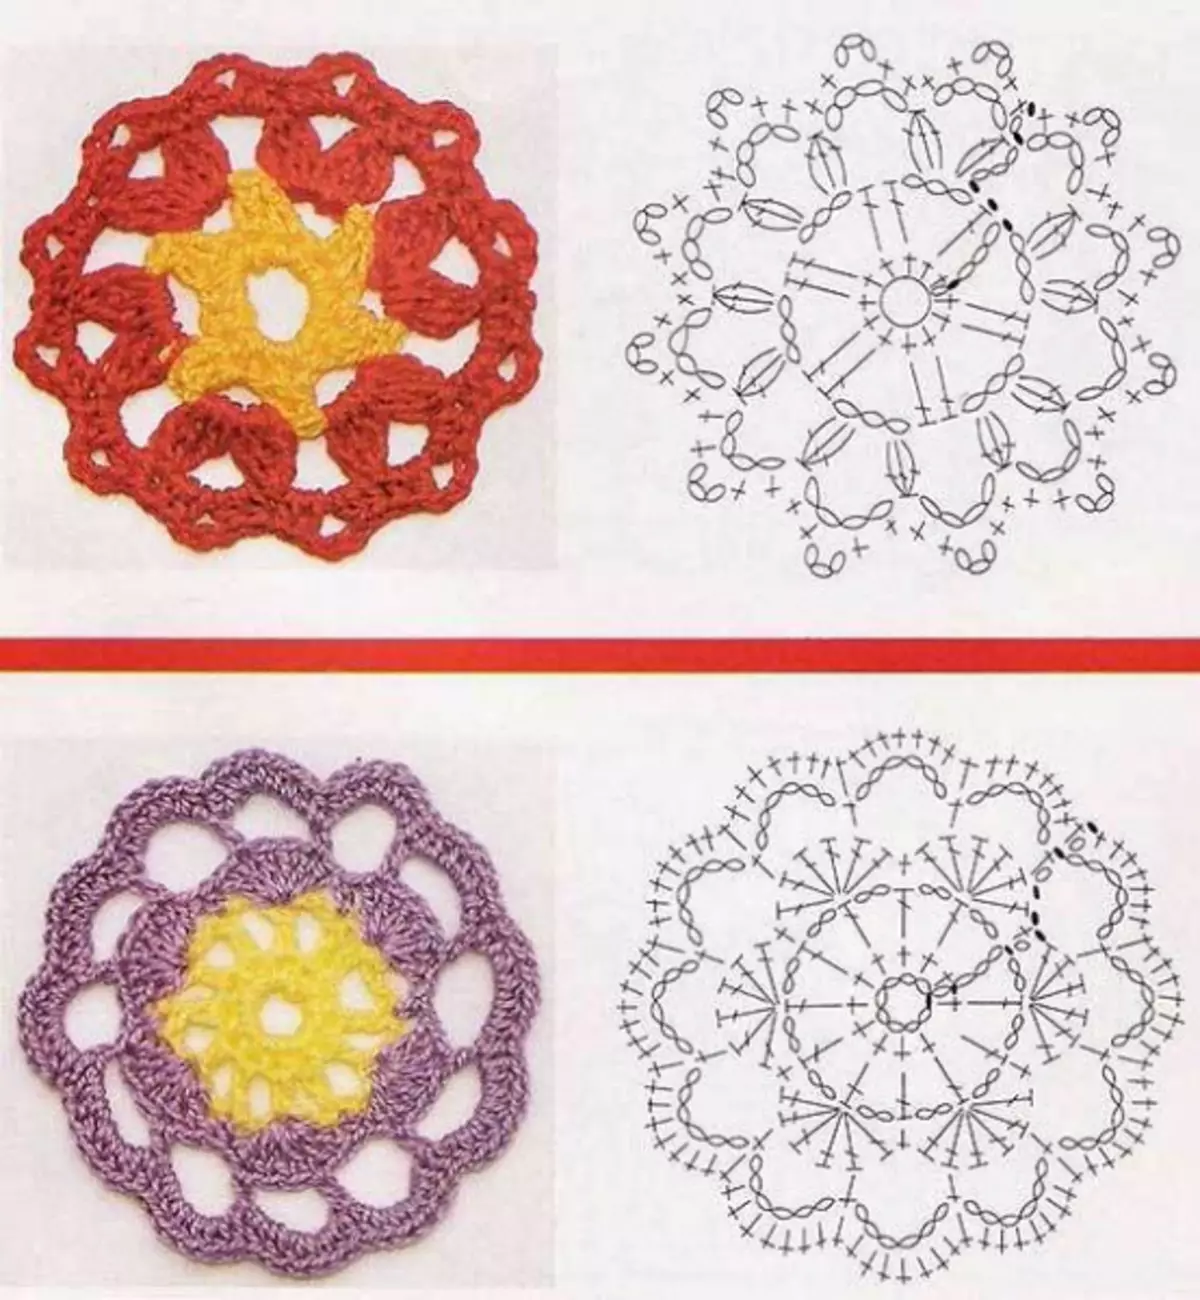 Round and square crochet motifs with schemes